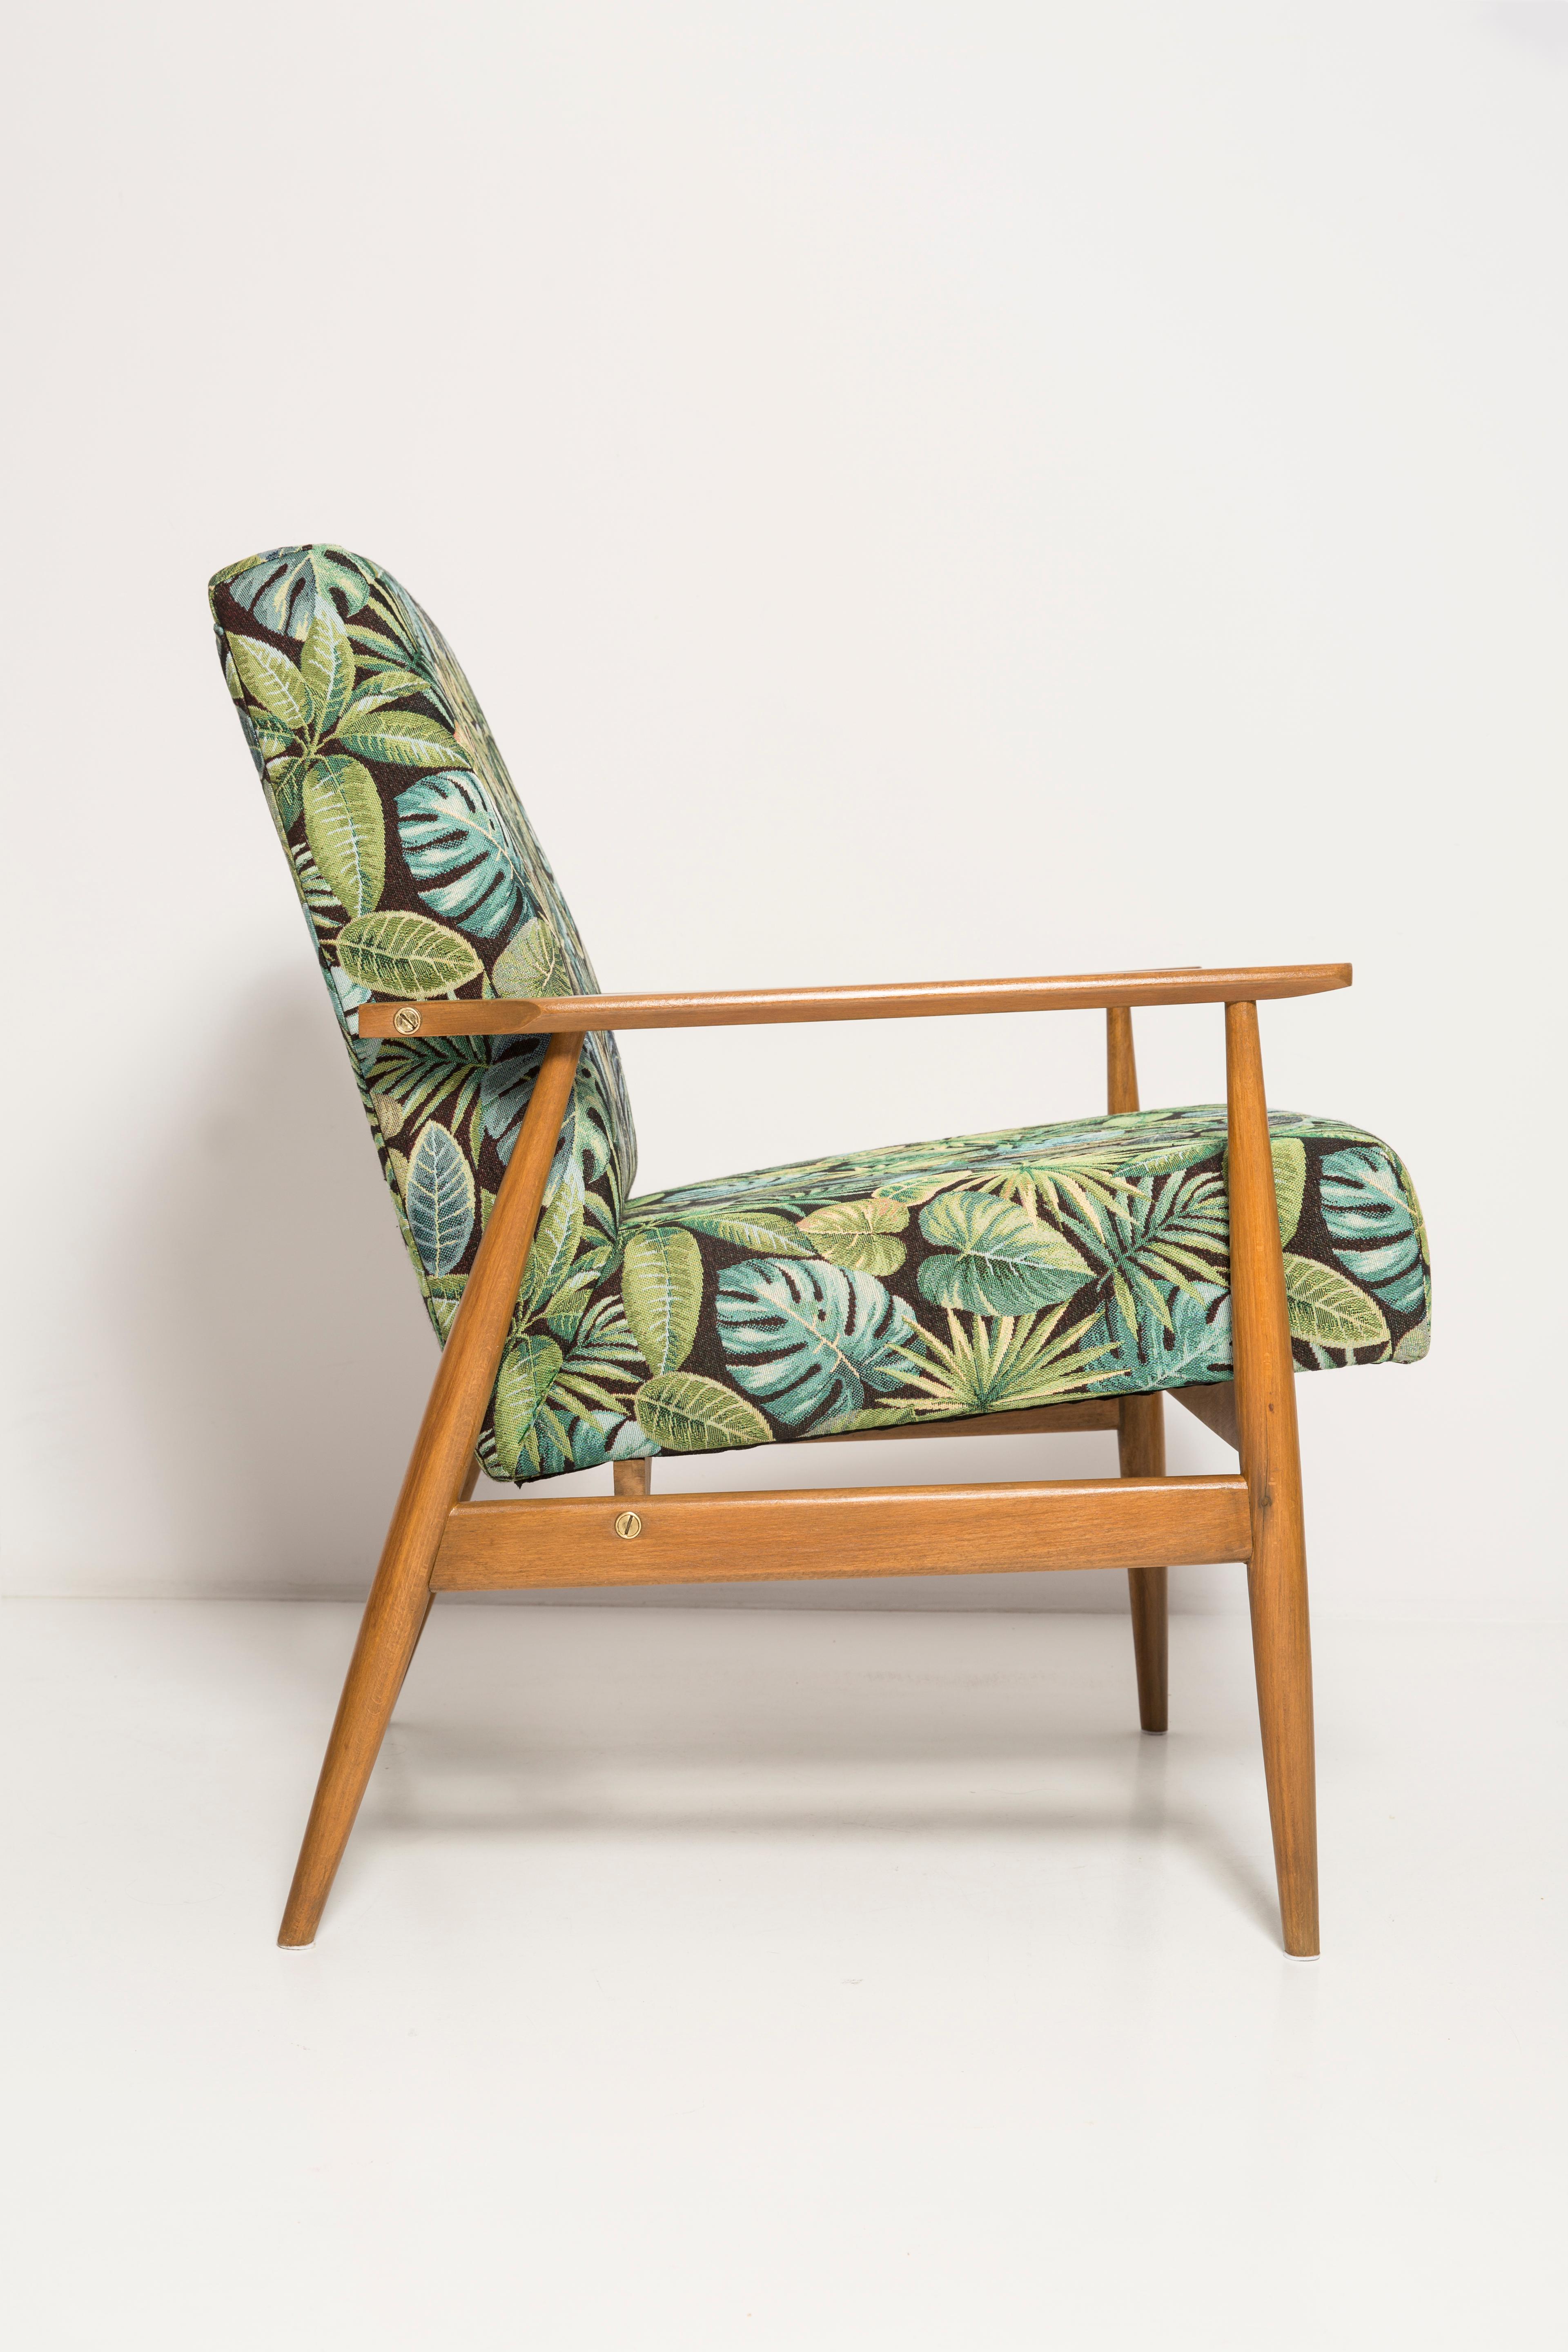 Mid-Century Green Leaves Jacquard Dante Armchair, H. Lis, 1960s For Sale 3